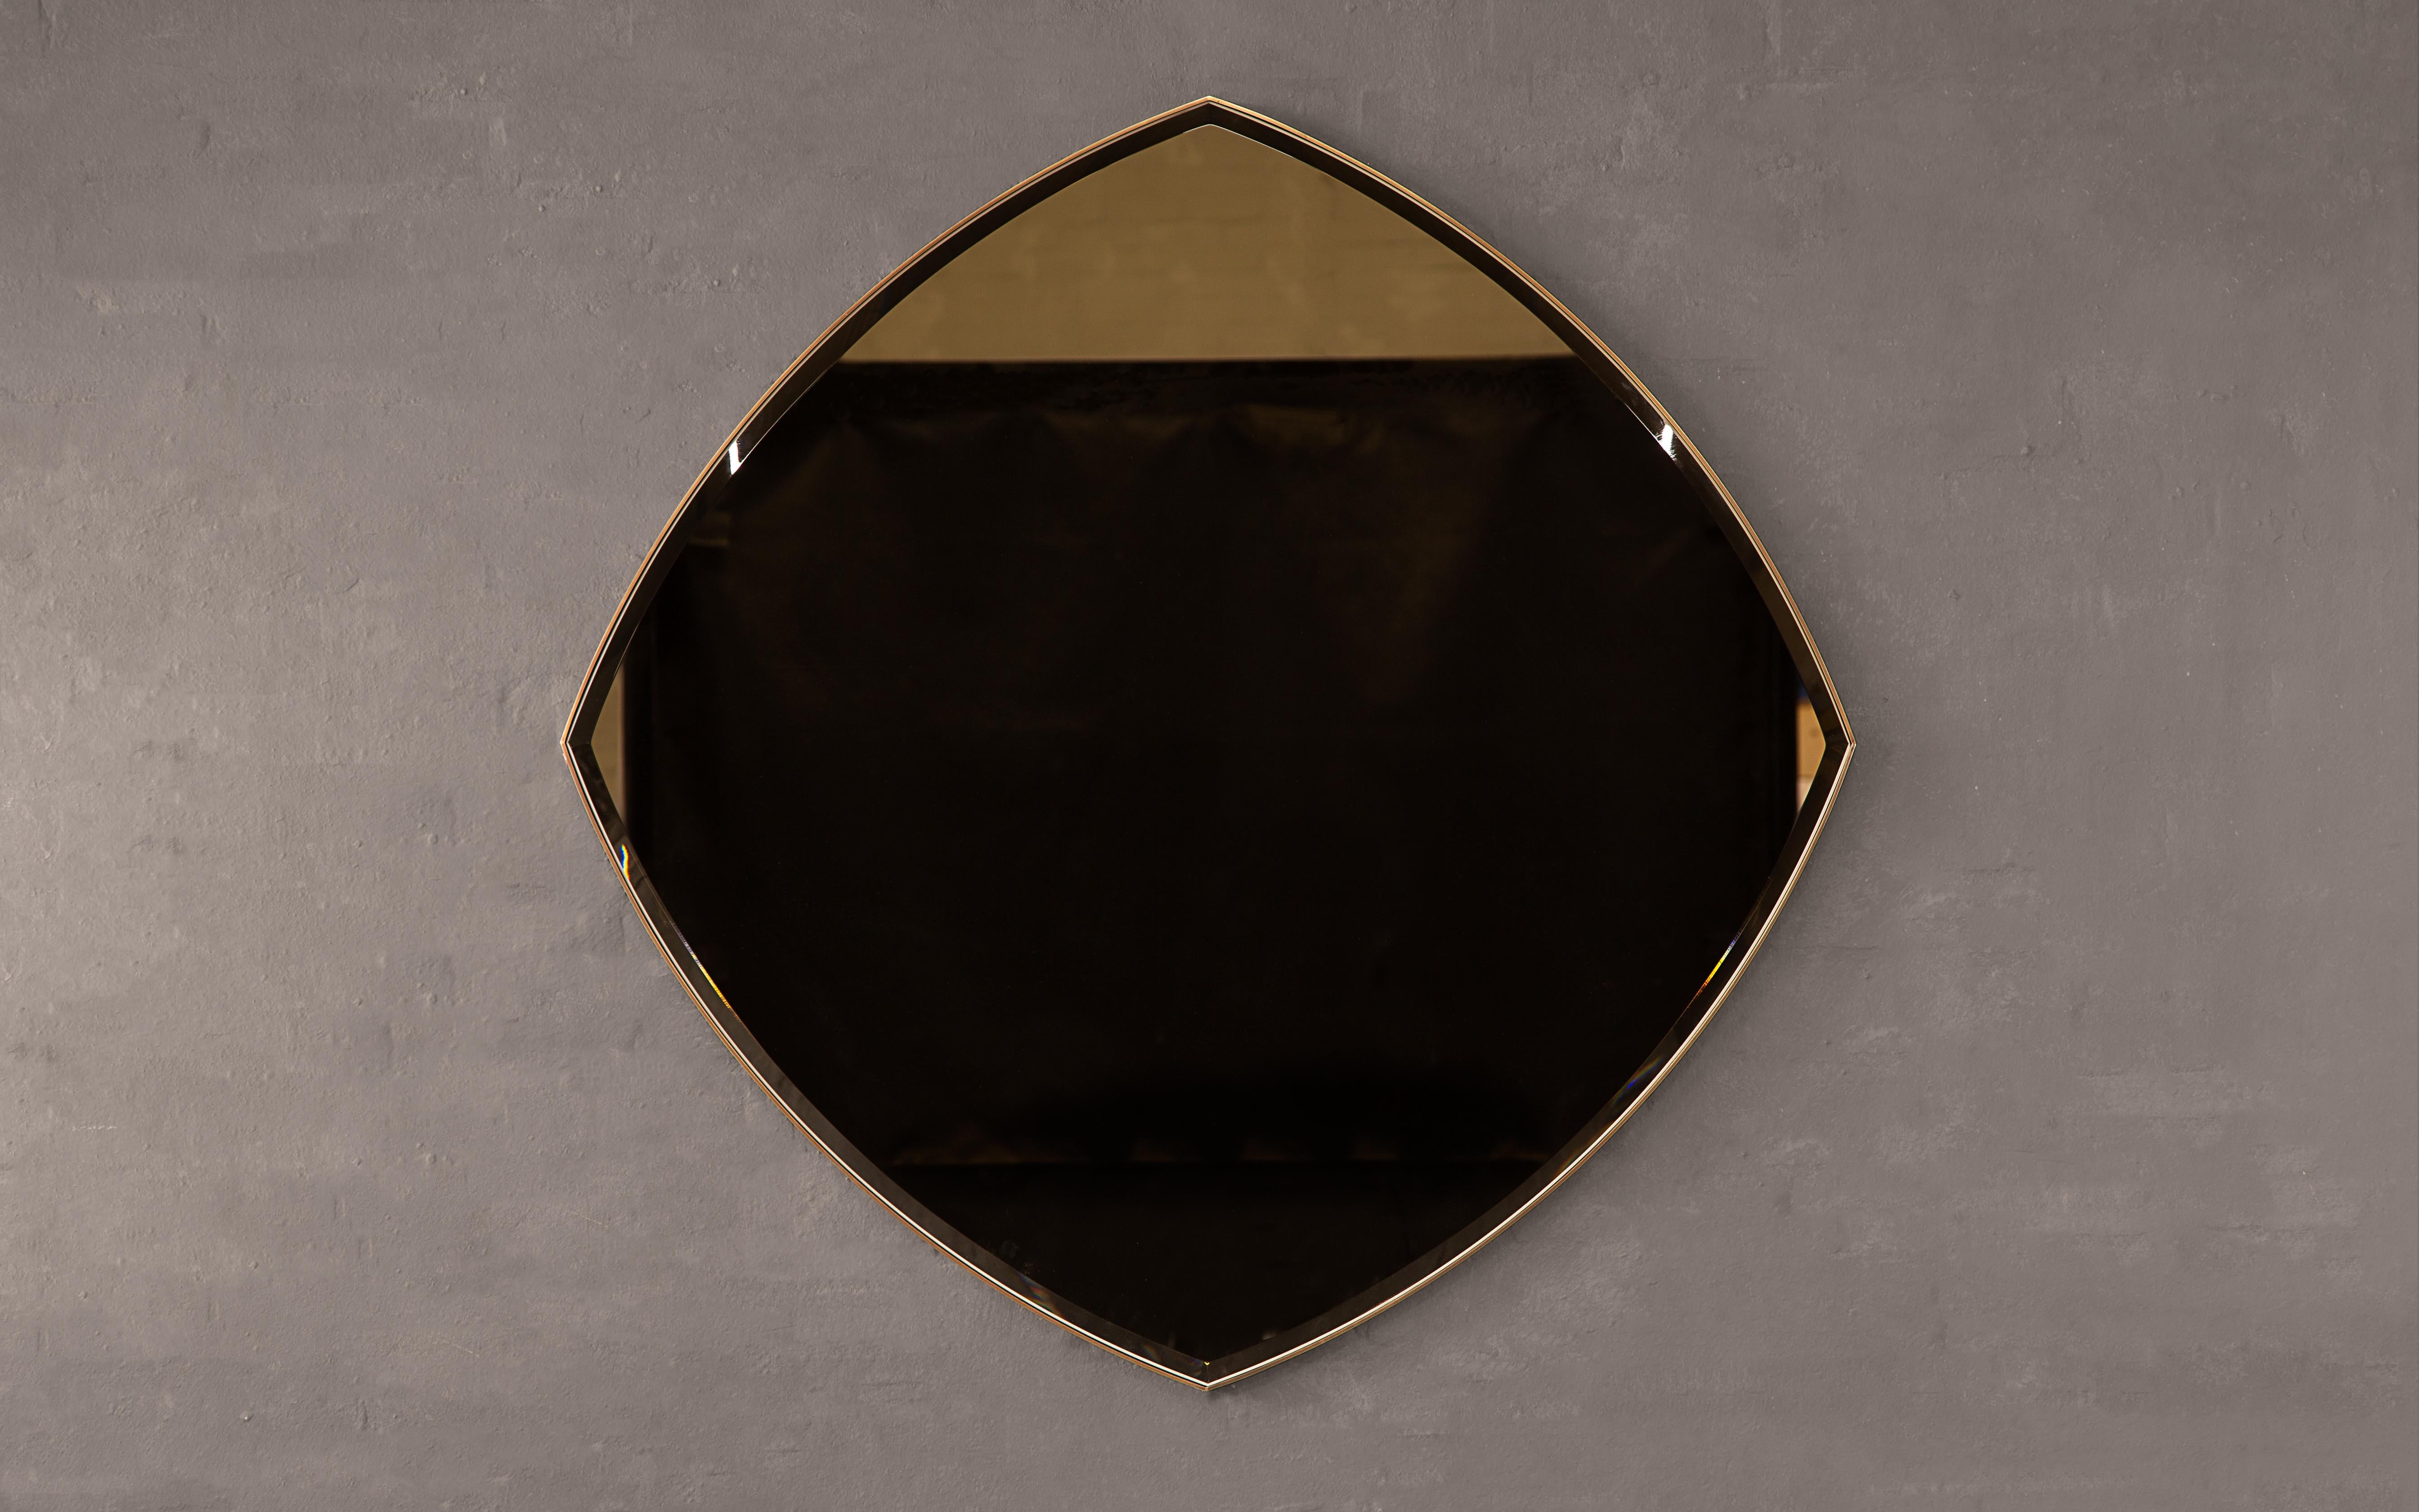 Alnwick mirror by Novocastrian
Dimensions: W 100 x D 2 x H 100 cm
Materials: Patinated brass frame.

Also available in:
80cm x 80cm x 2cm/ 120cm x 120cm x 2cm.

We are metalworkers, architects, welders, artists, makers, engineers, and